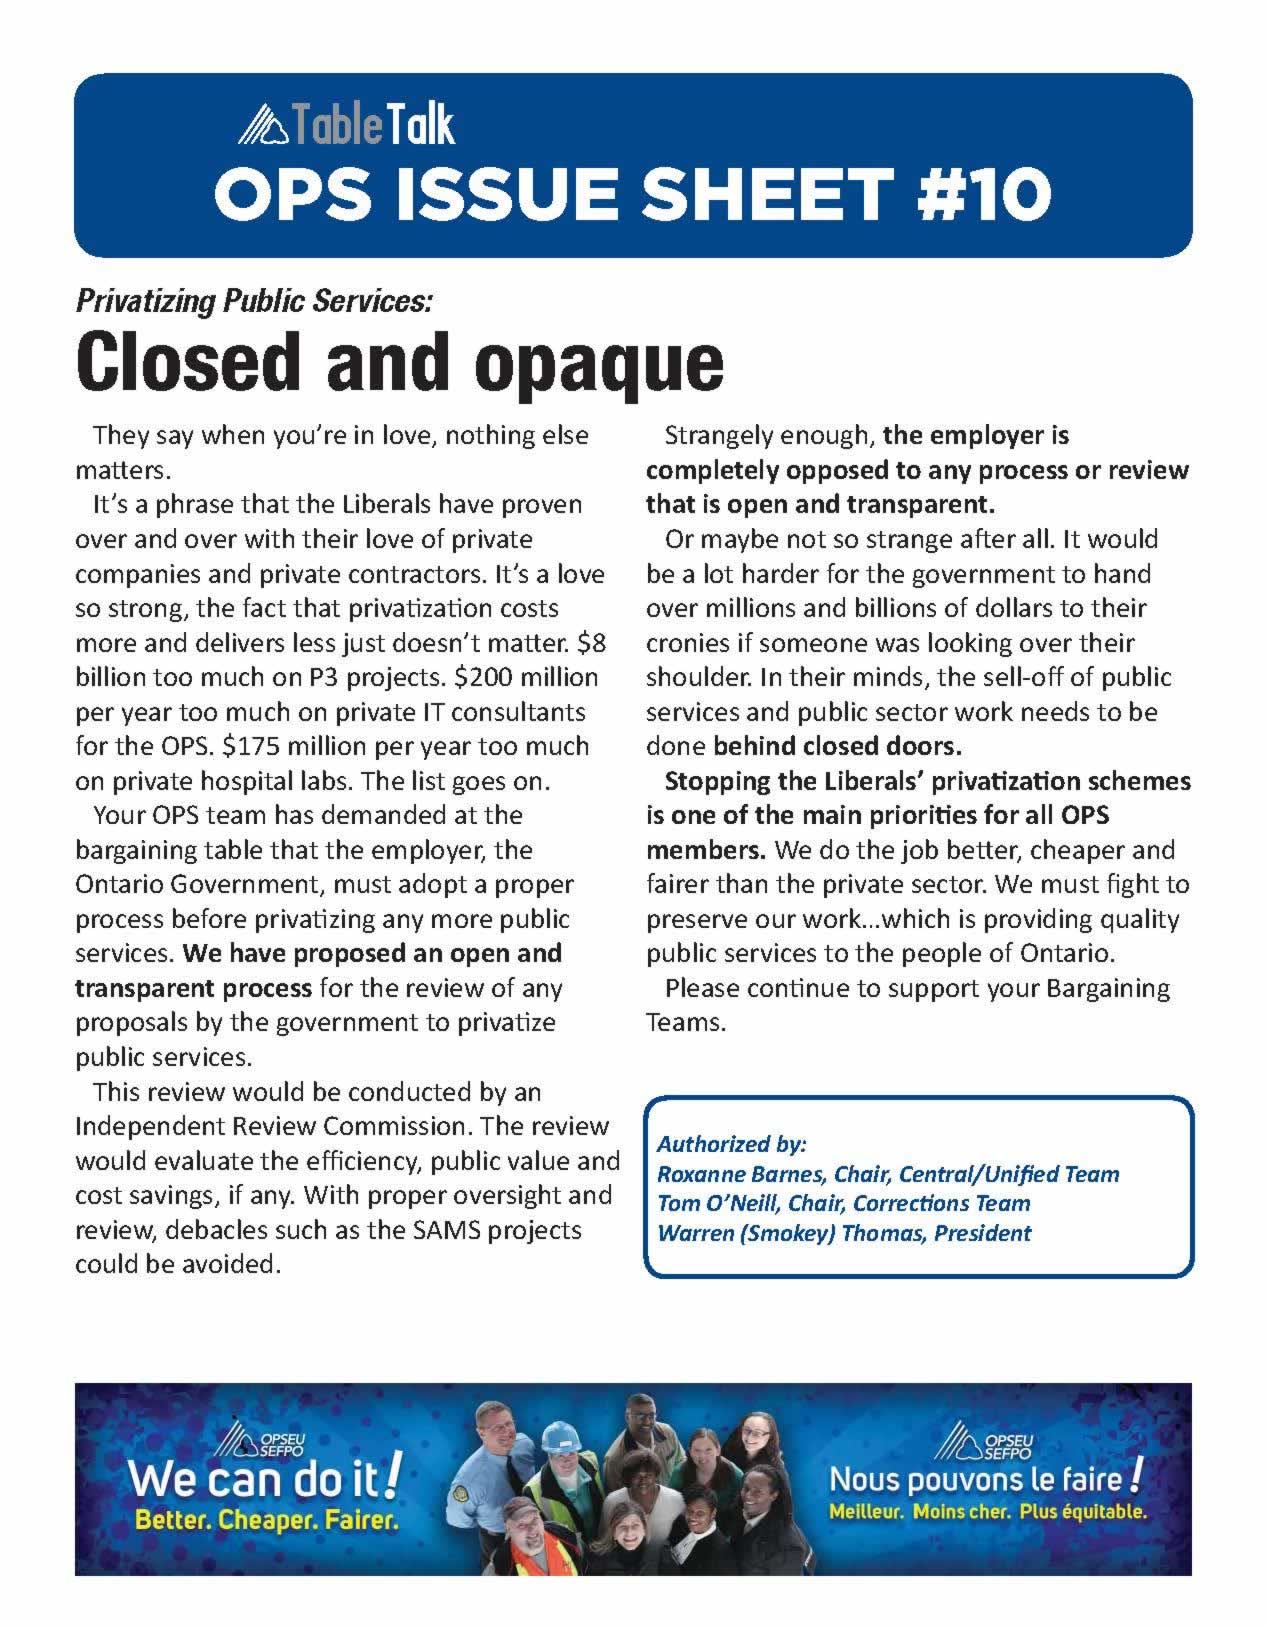 OPS Issue Sheet: Privatizing Public Services: Closed & Opaque